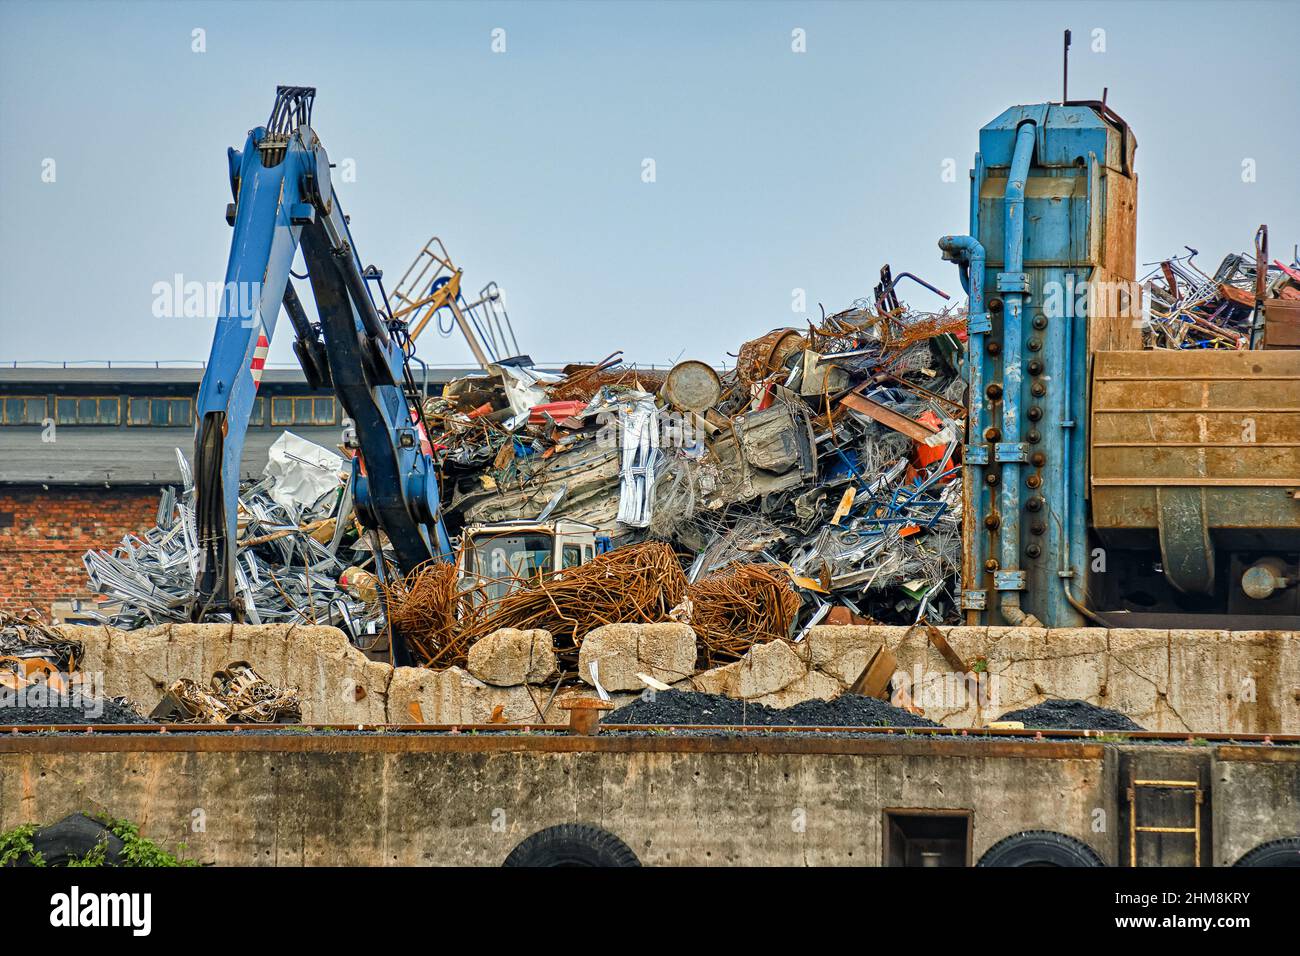 Close view of backhoe loader and big pile of construction debris in river port in overcast day. Metal and concrete waste recycle. Stock Photo